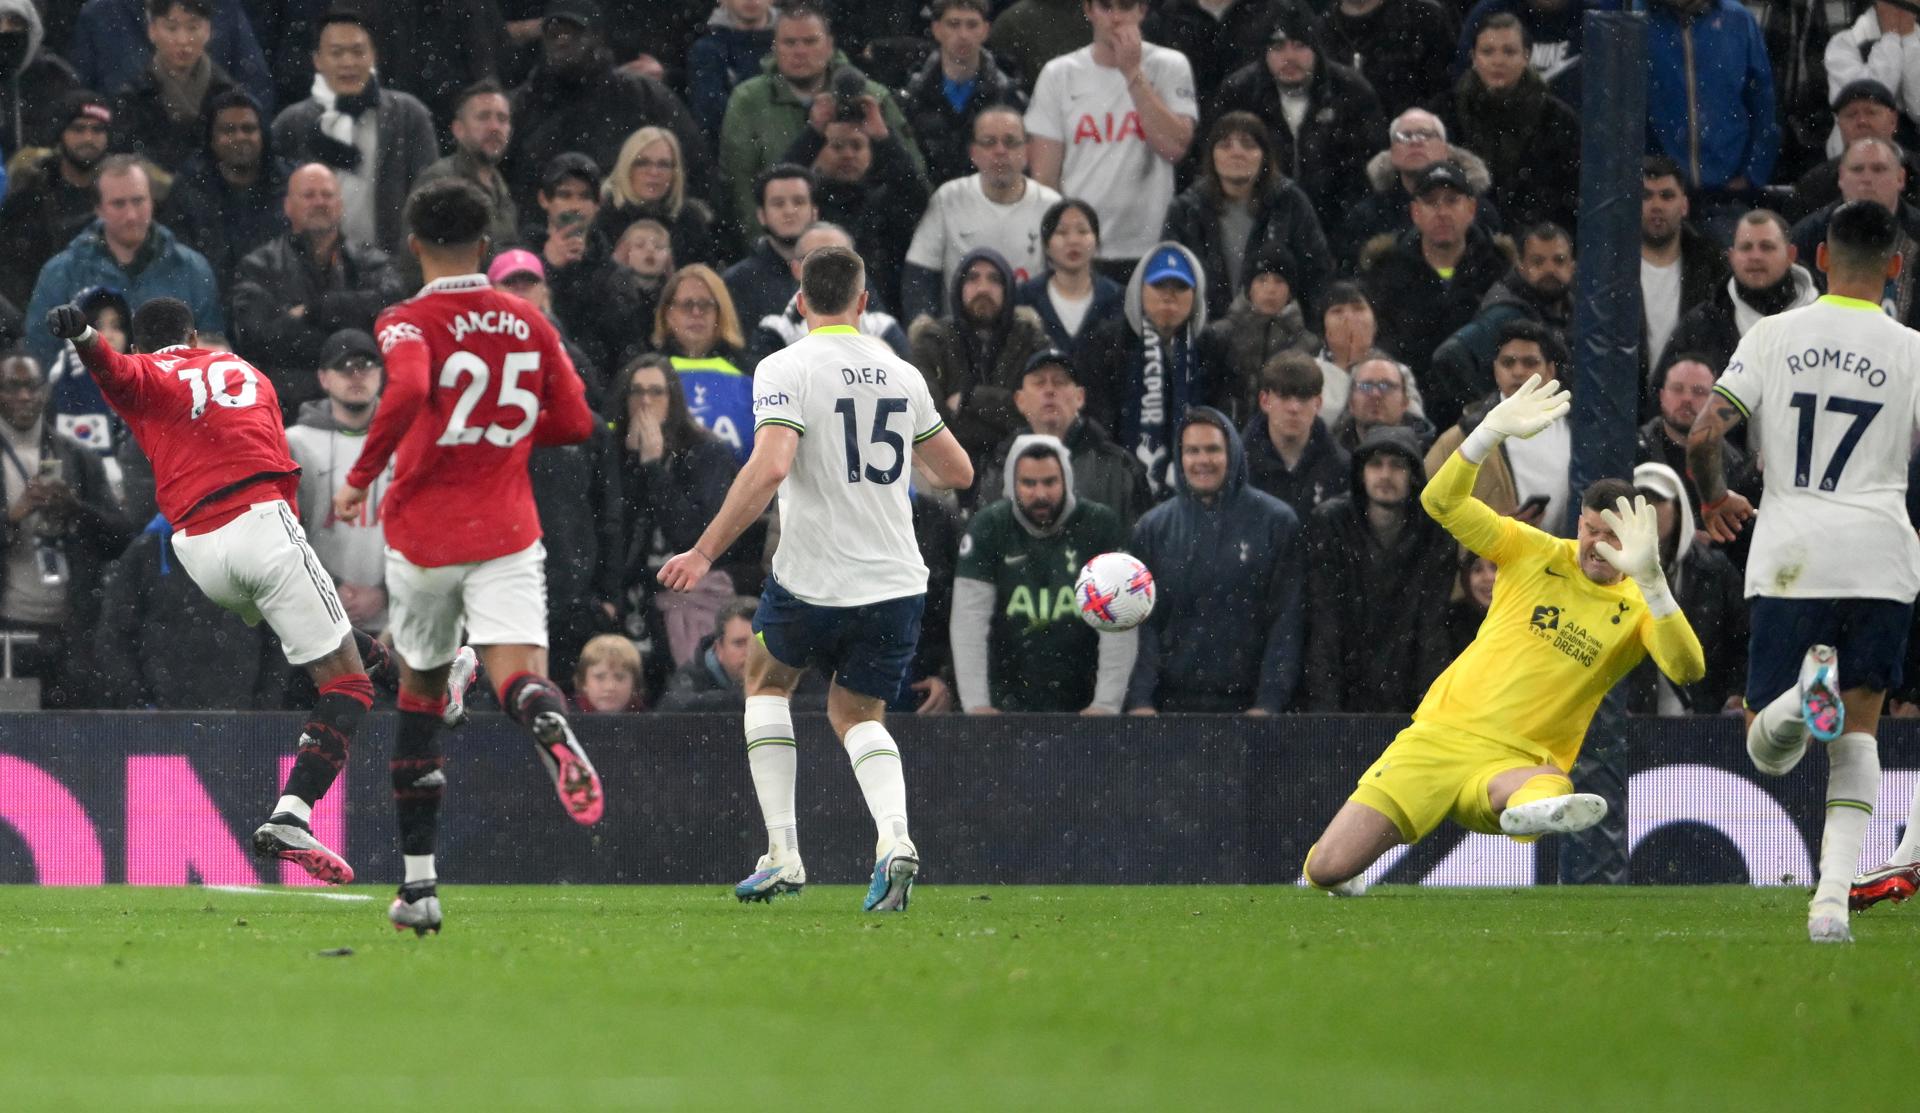 Manchester United's Marcus Rashford (L) scores against Tottenham Hotspur during a Premier League match in London on 27 April 2023. EFE/EPA/DANIEL HAMBURY EDITORIAL USE ONLY. No use with unauthorized audio, video, data, fixture lists, club/league logos or 'live' services. Online in-match use limited to 120 images, no video emulation. No use in betting, games or single club/league/player publications.
